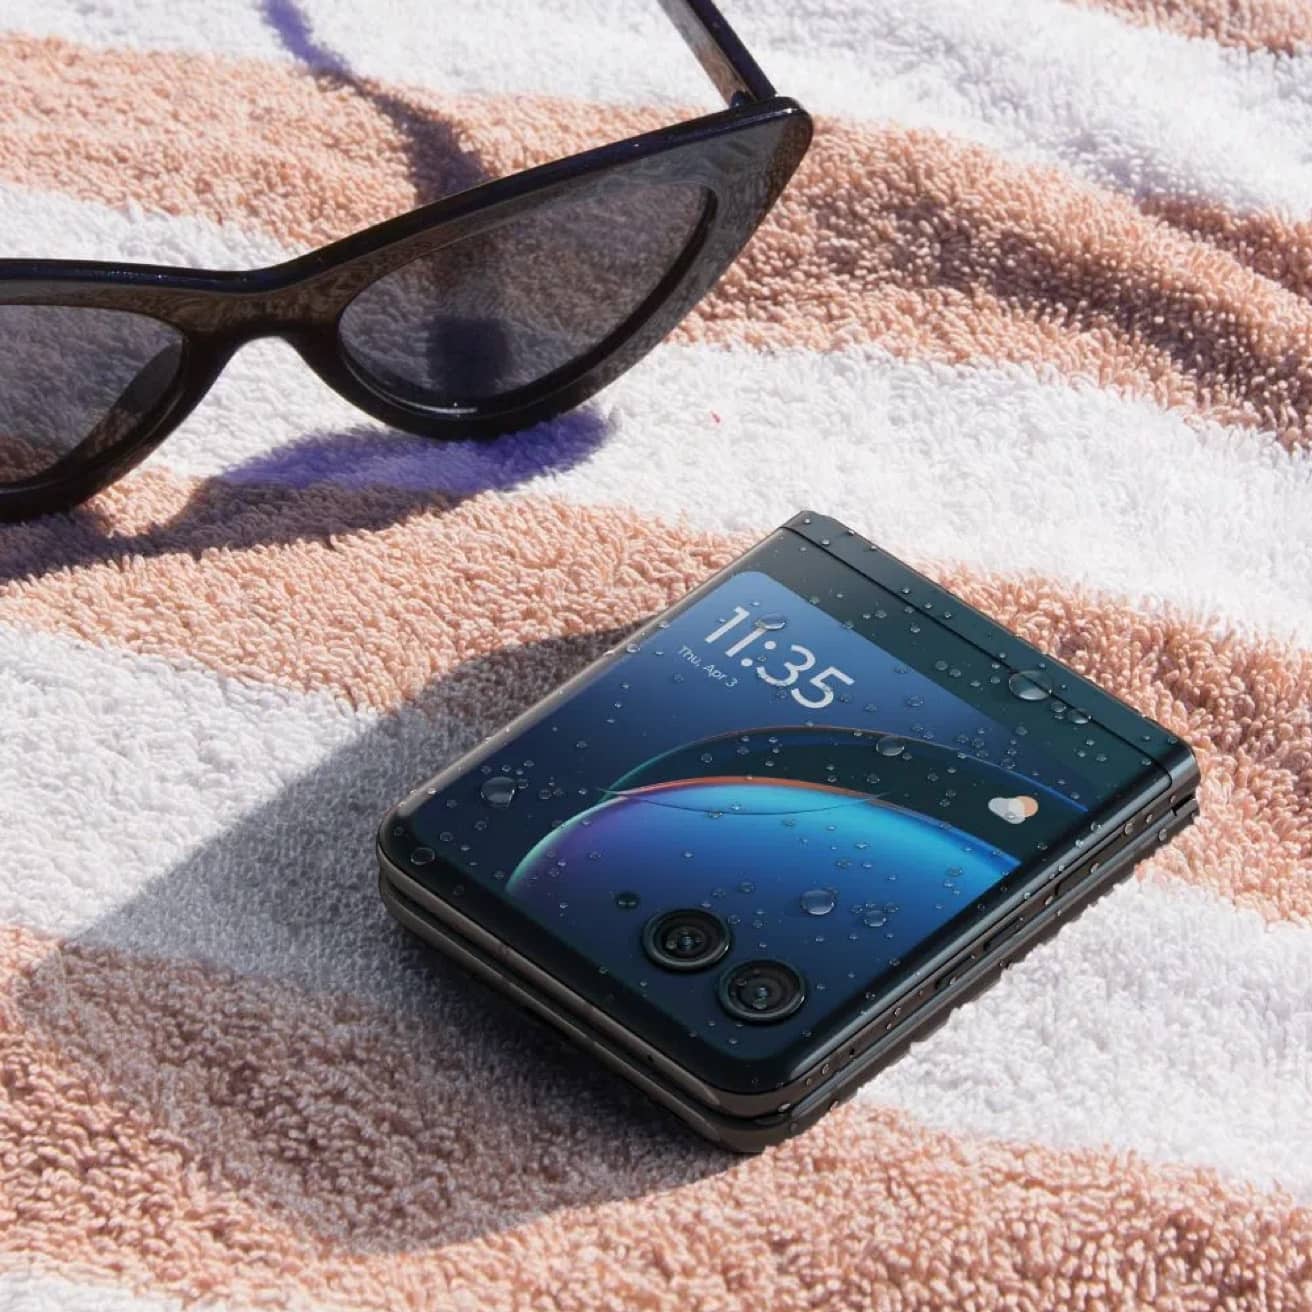 A closed motorola razr 40 ultra rests on a beach towel, covered with water droplets. The external display depicts the default home screen, indicating the phone is still working.